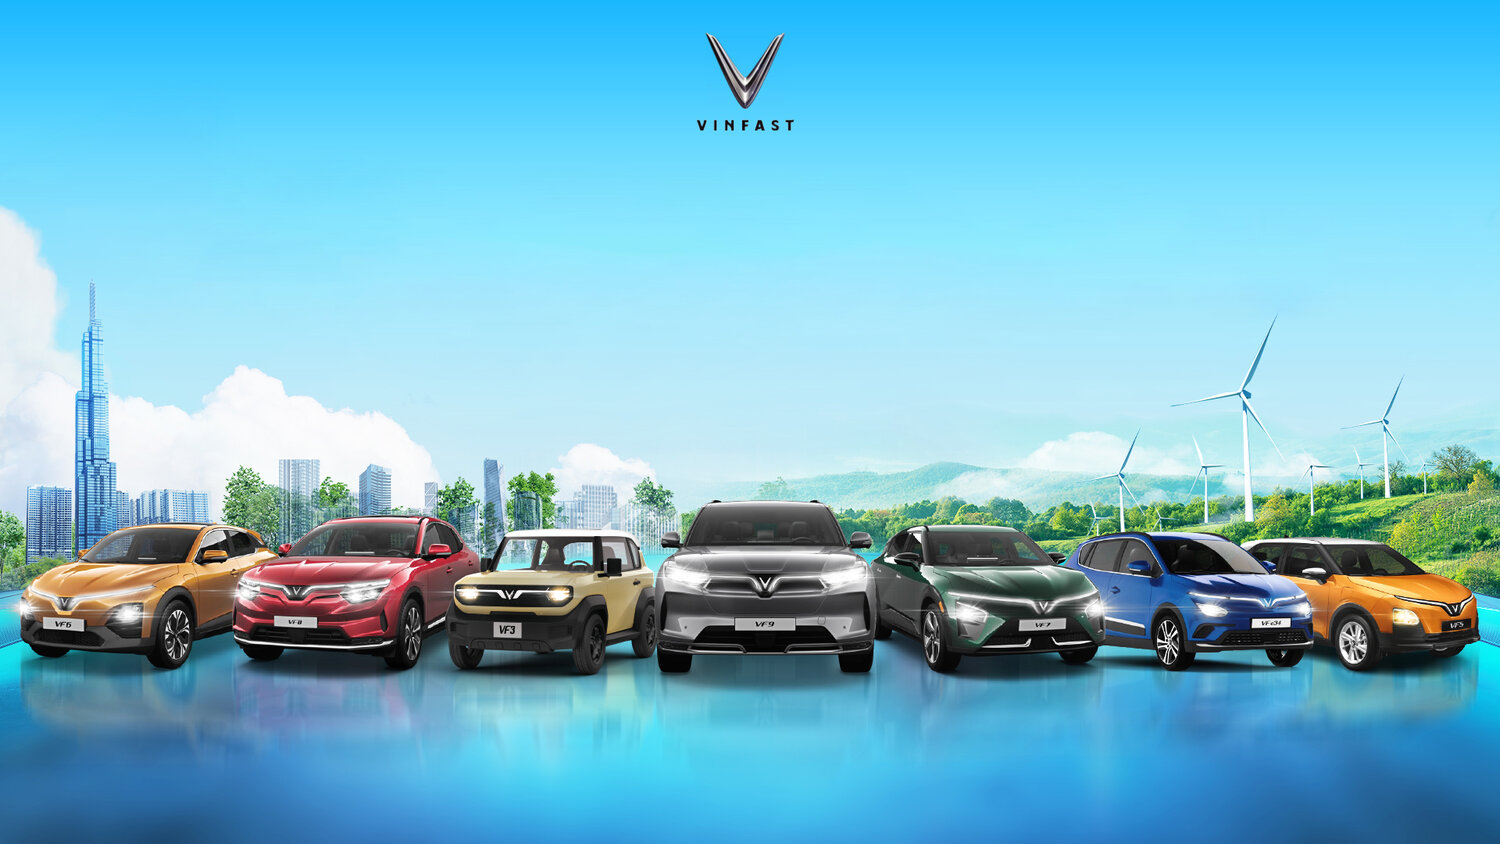 VinFast, the Vietnamese electric car manufacturer bringing the largest economic development project in state history to Chatham County, has posted initial site plans for its electric vehicle factory.